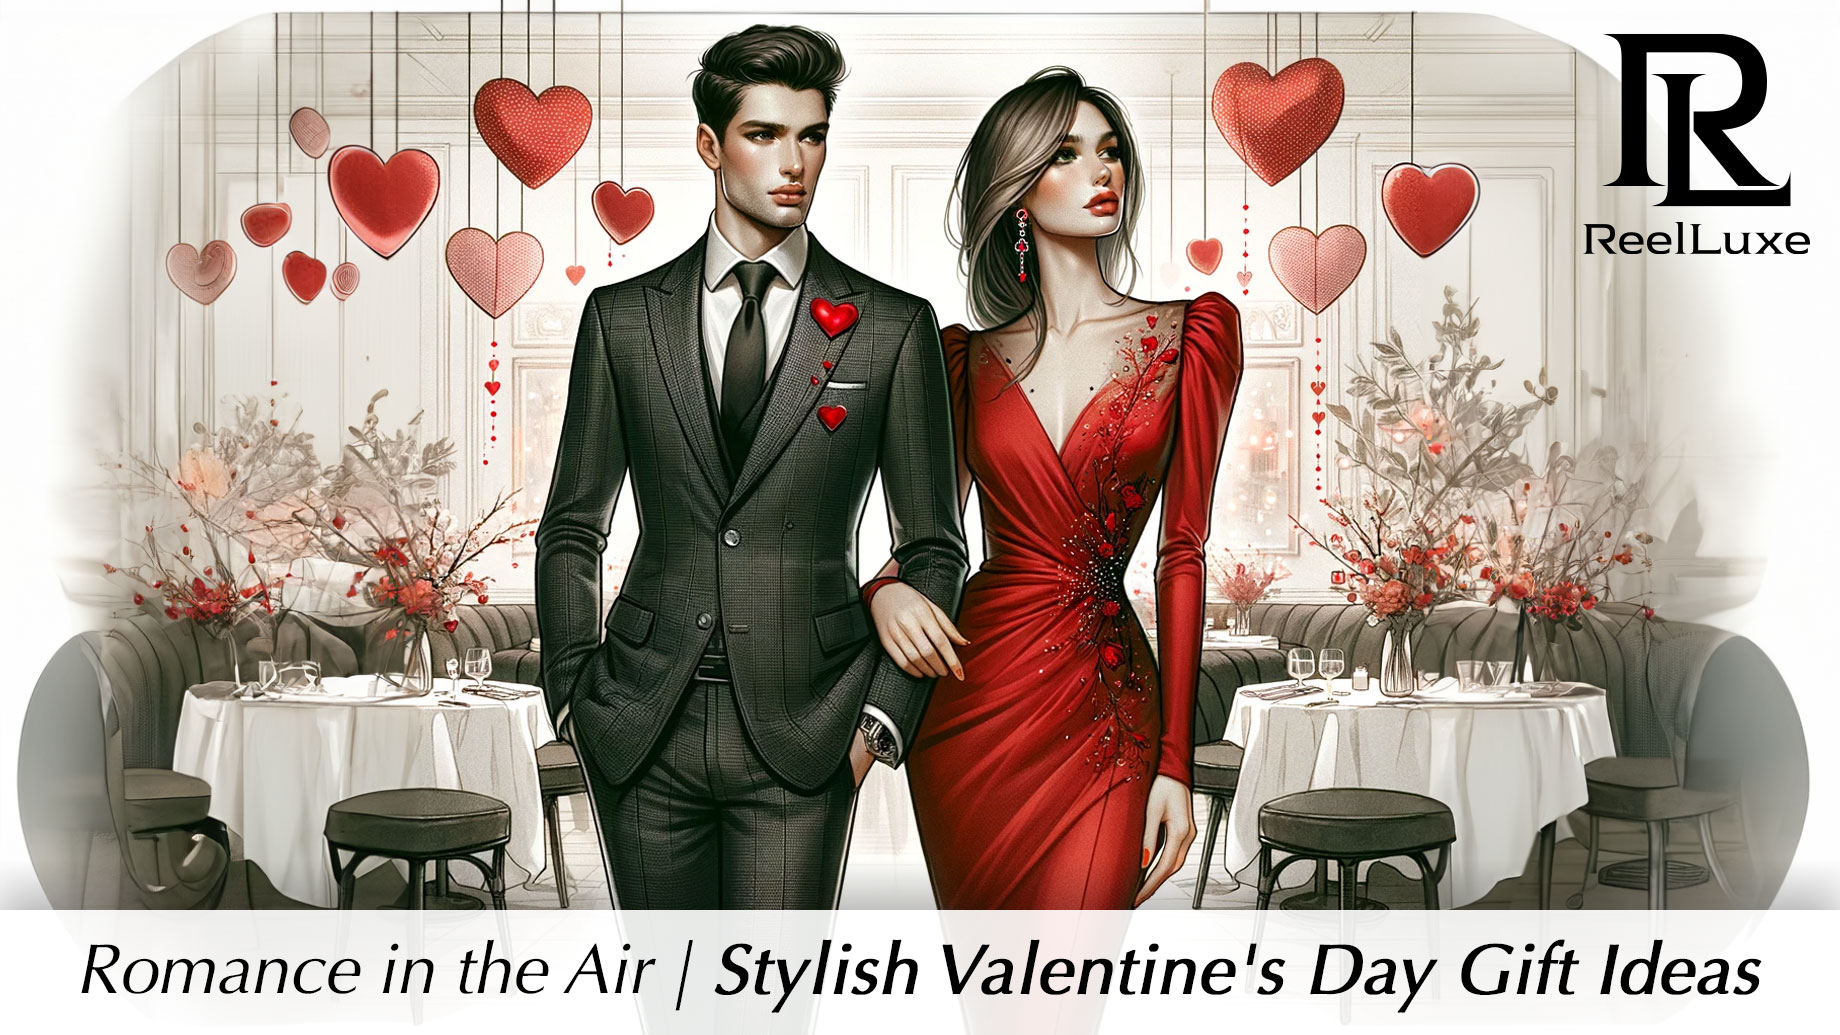 Romance in the Air: Stylish Valentine’s Day Gift Ideas